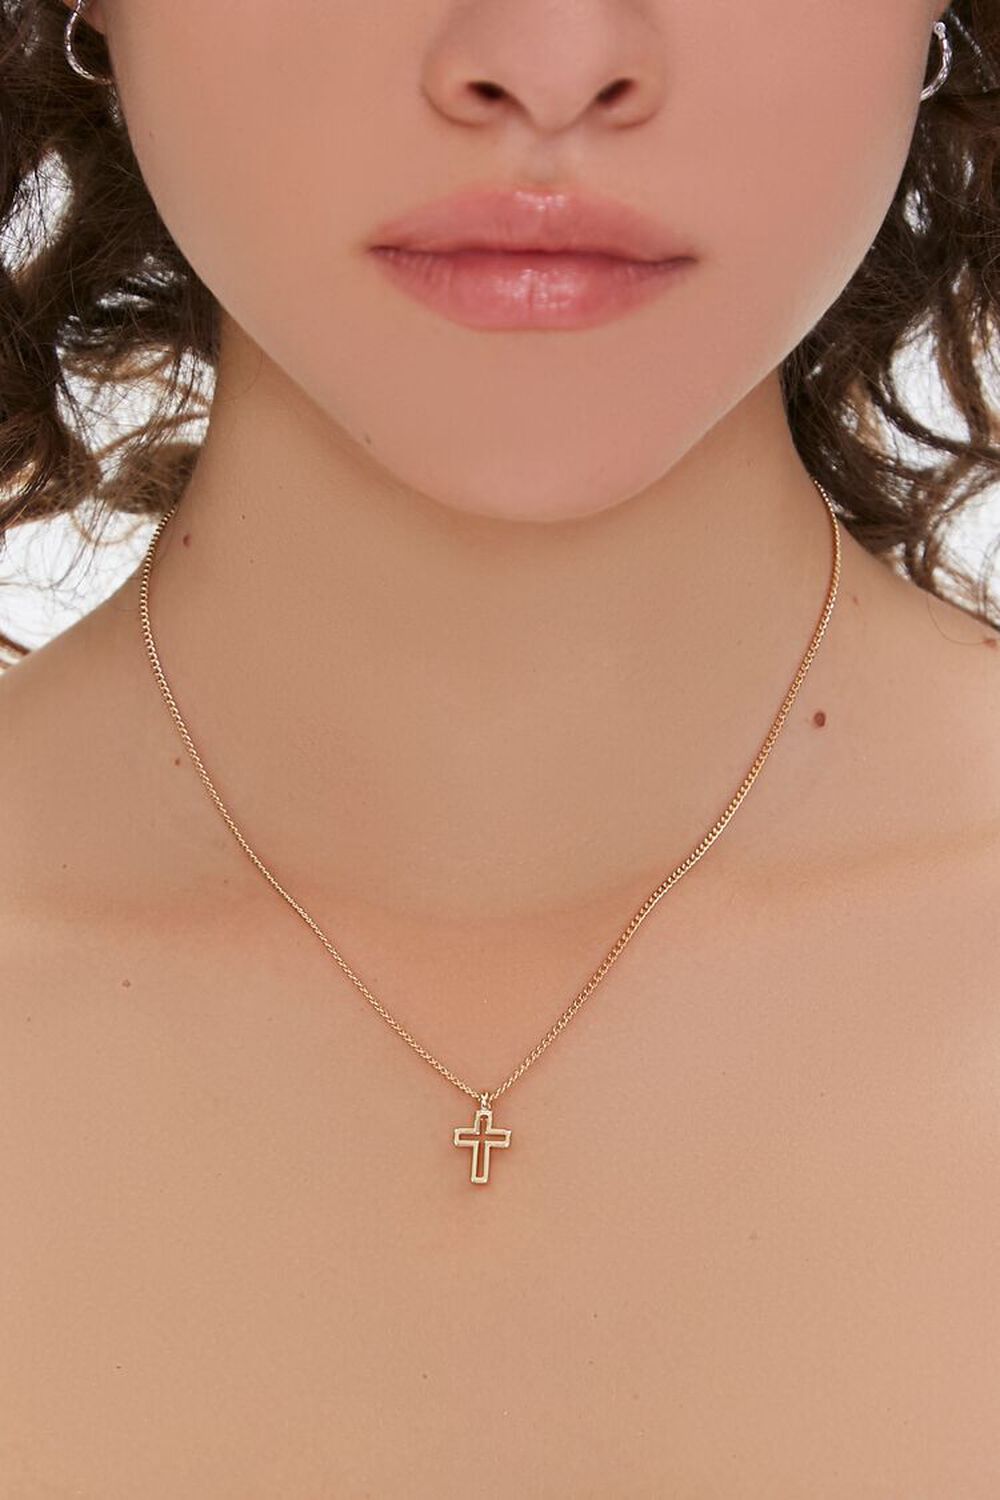 GOLD Cutout Cross Charm Necklace, image 1